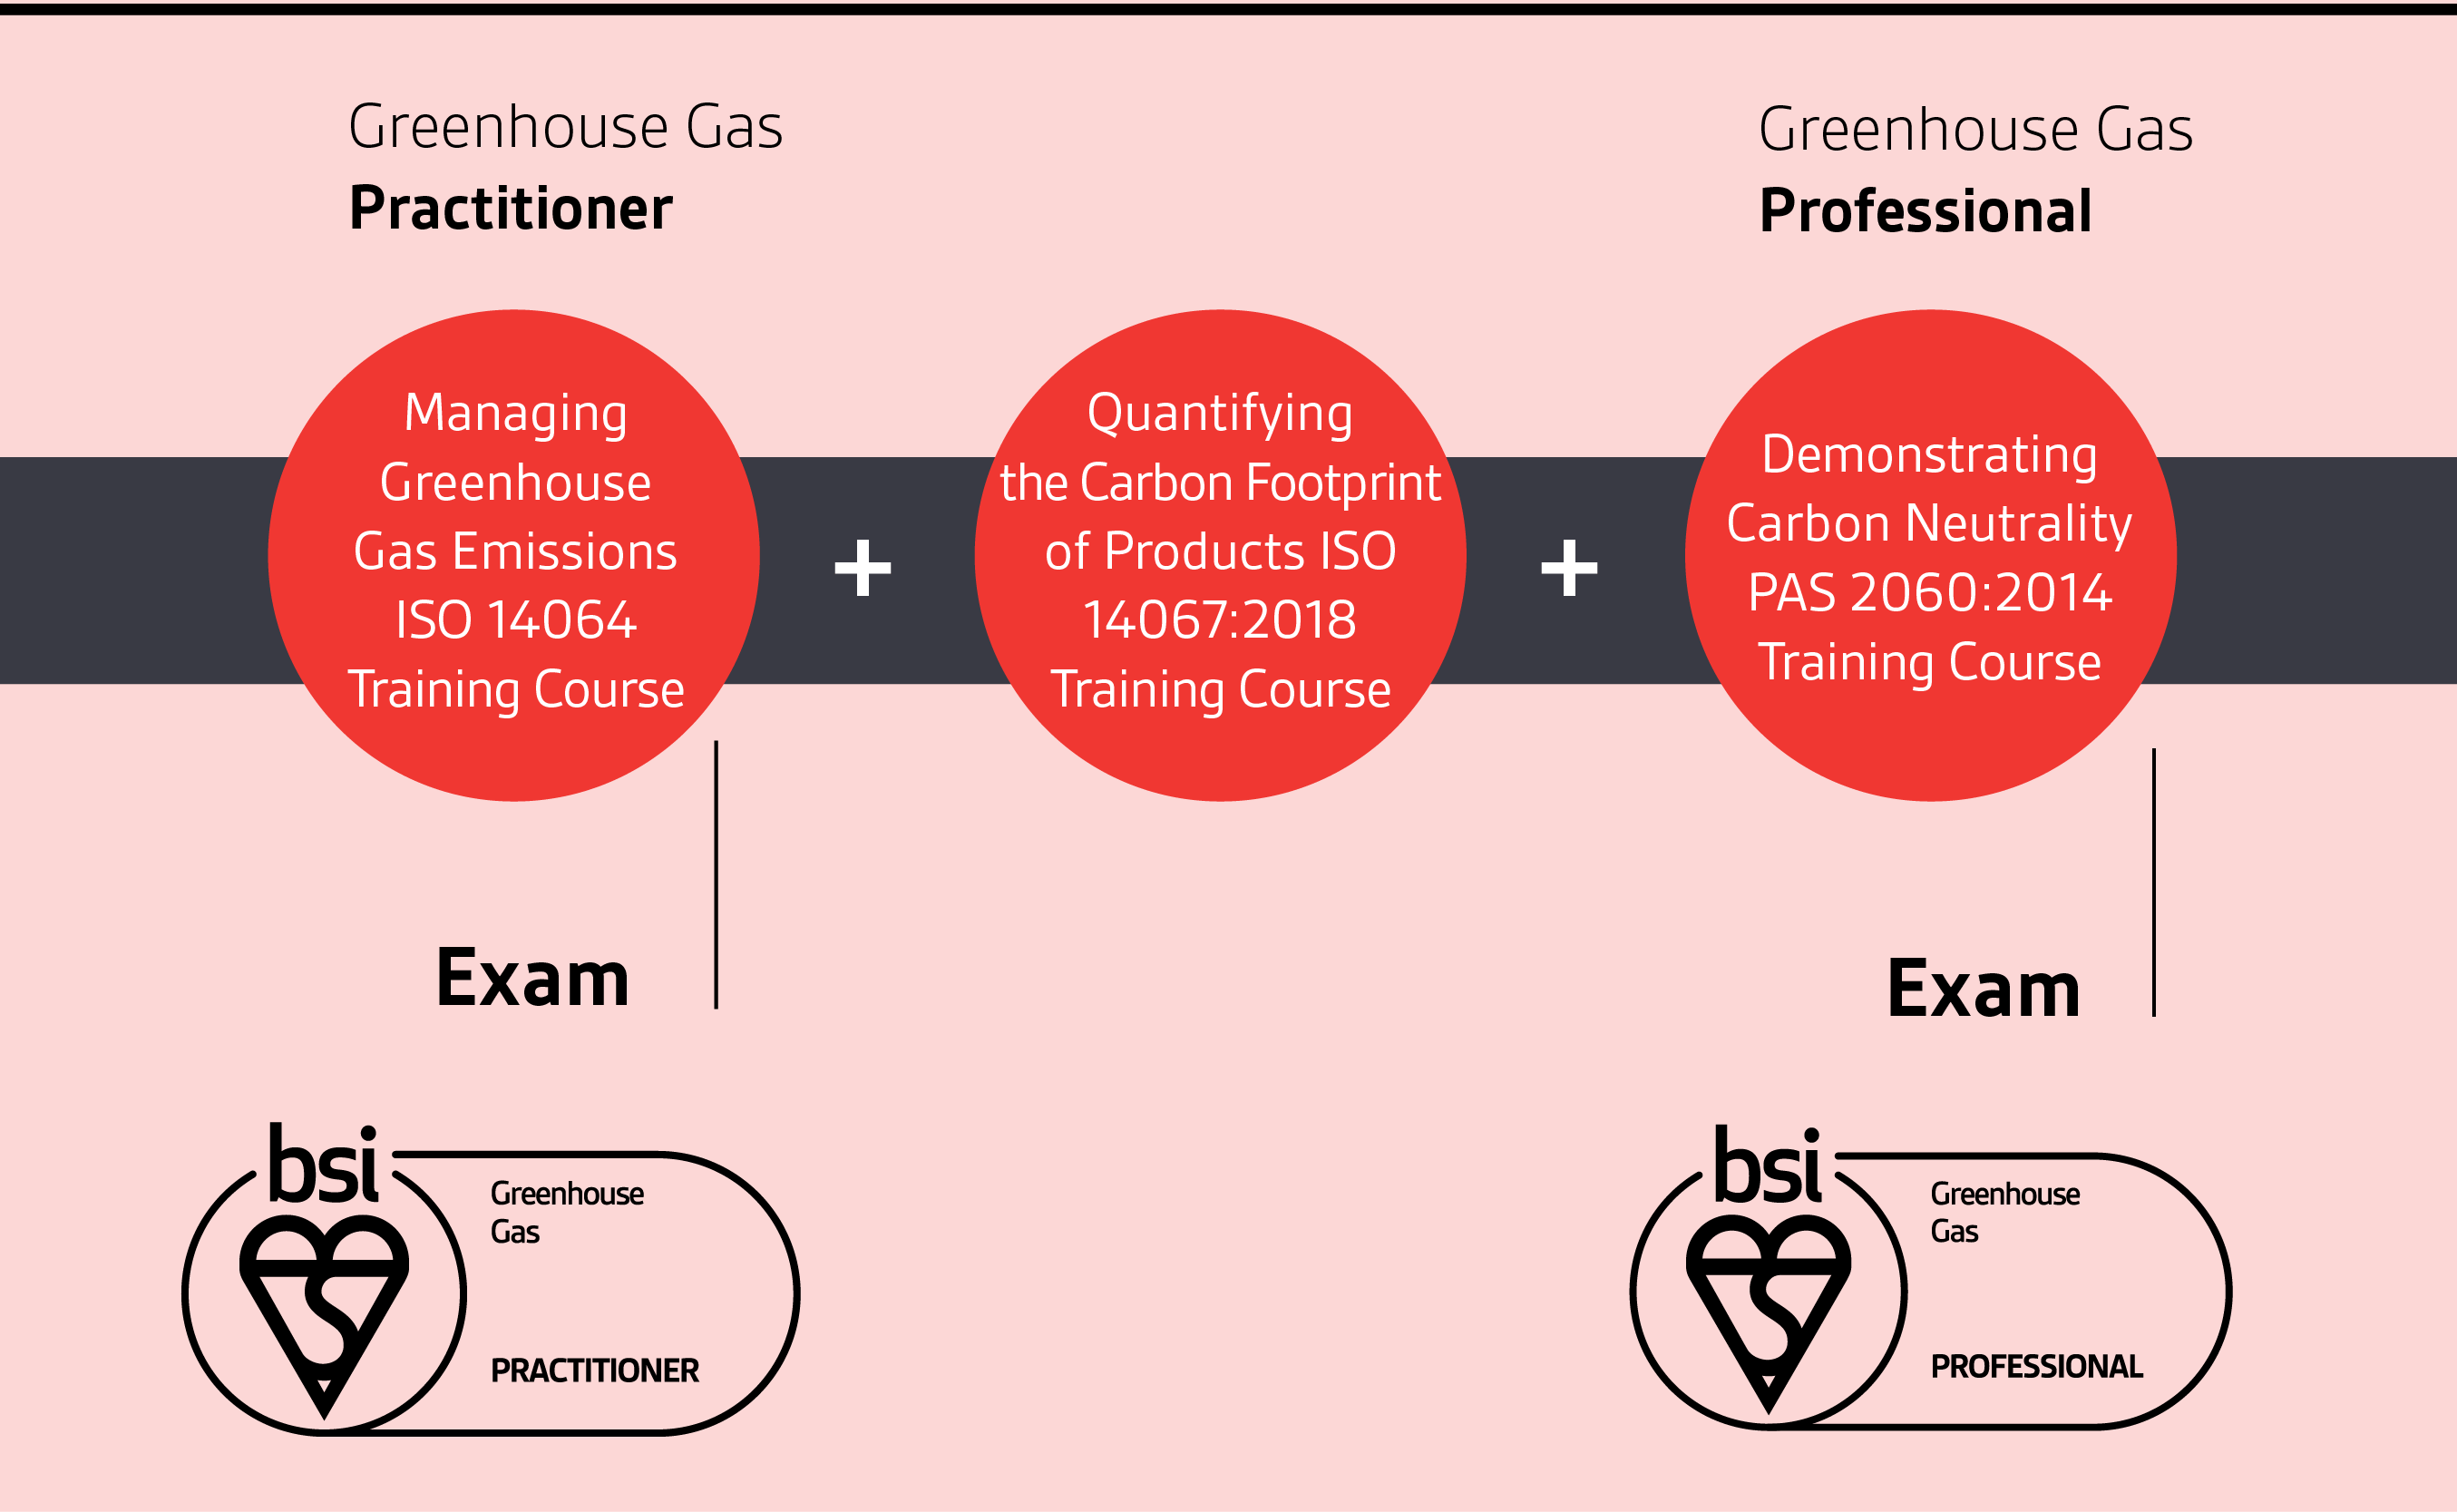 BSI_Greehhouse_Gas_qualification_pathway.png